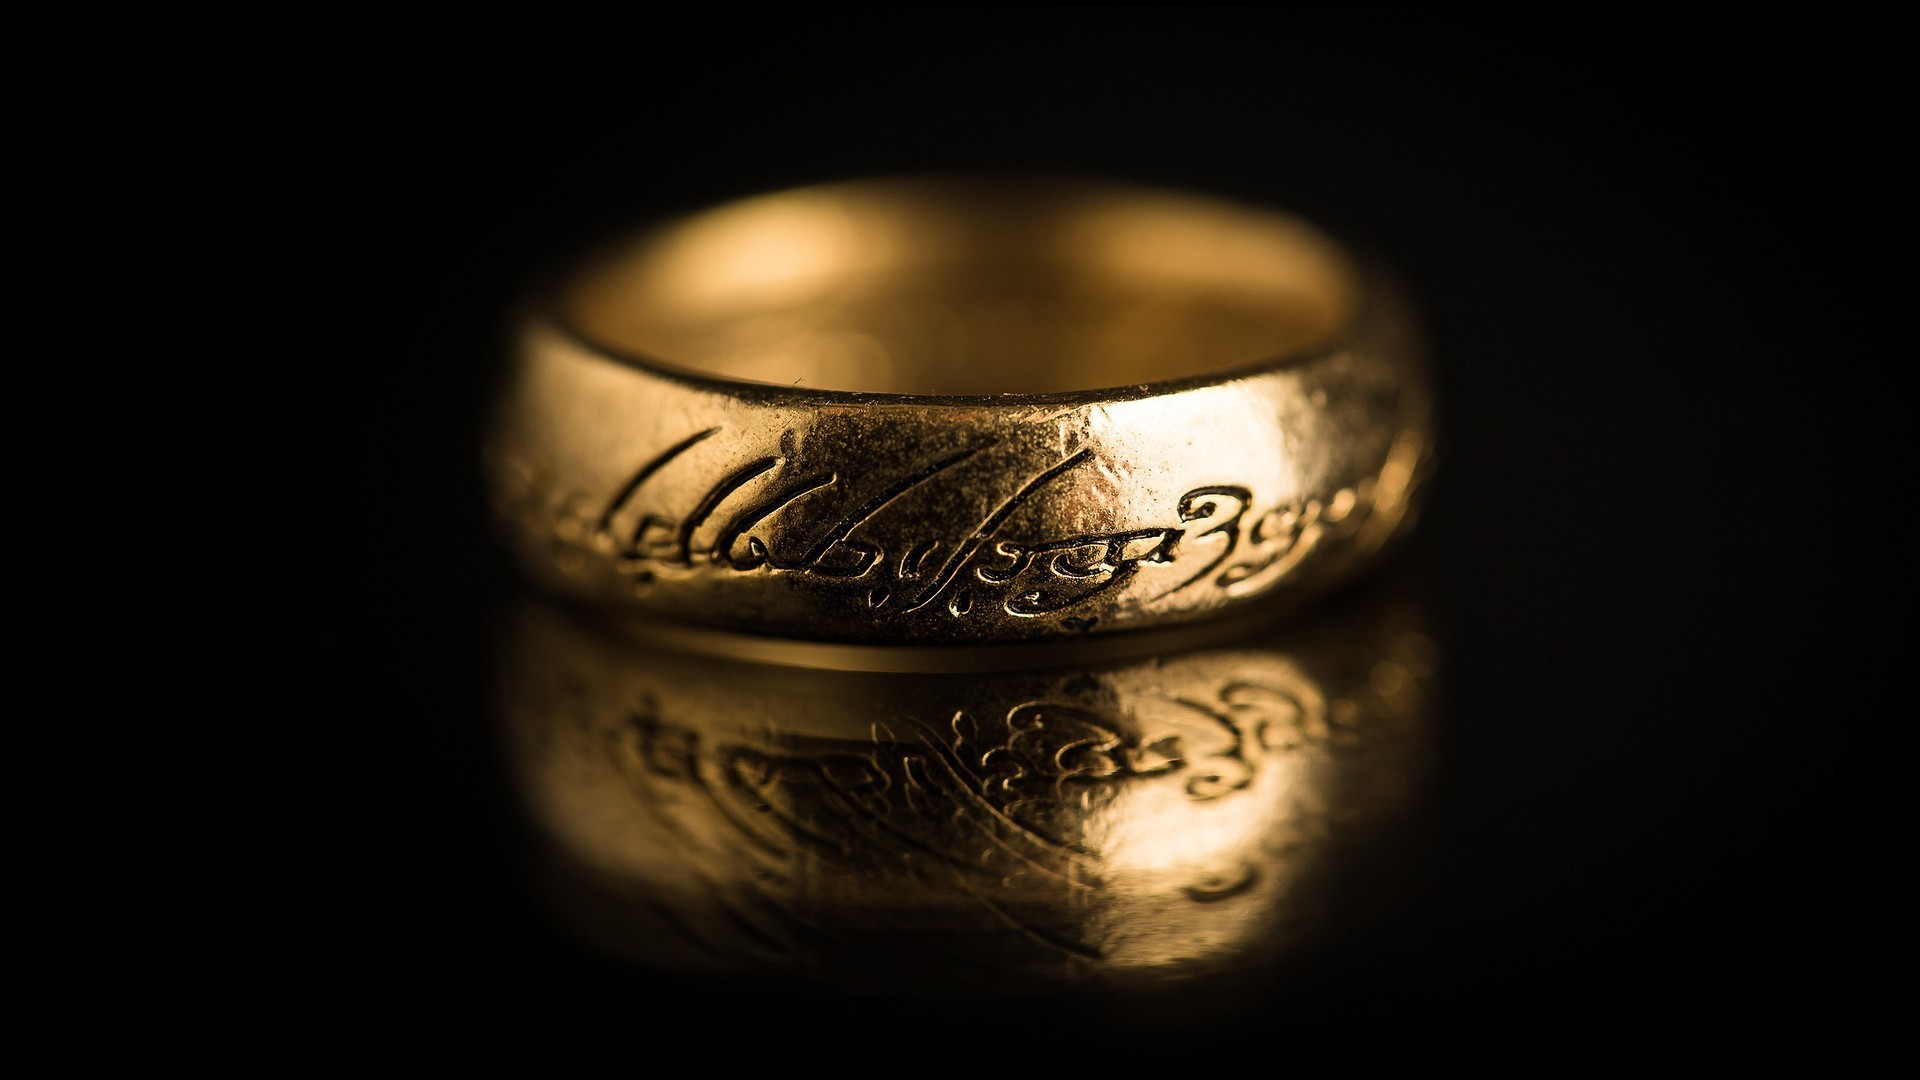 The Lord Of The Rings Rings Reflection Black Background Depth Of Field The One Ring 1920x1080